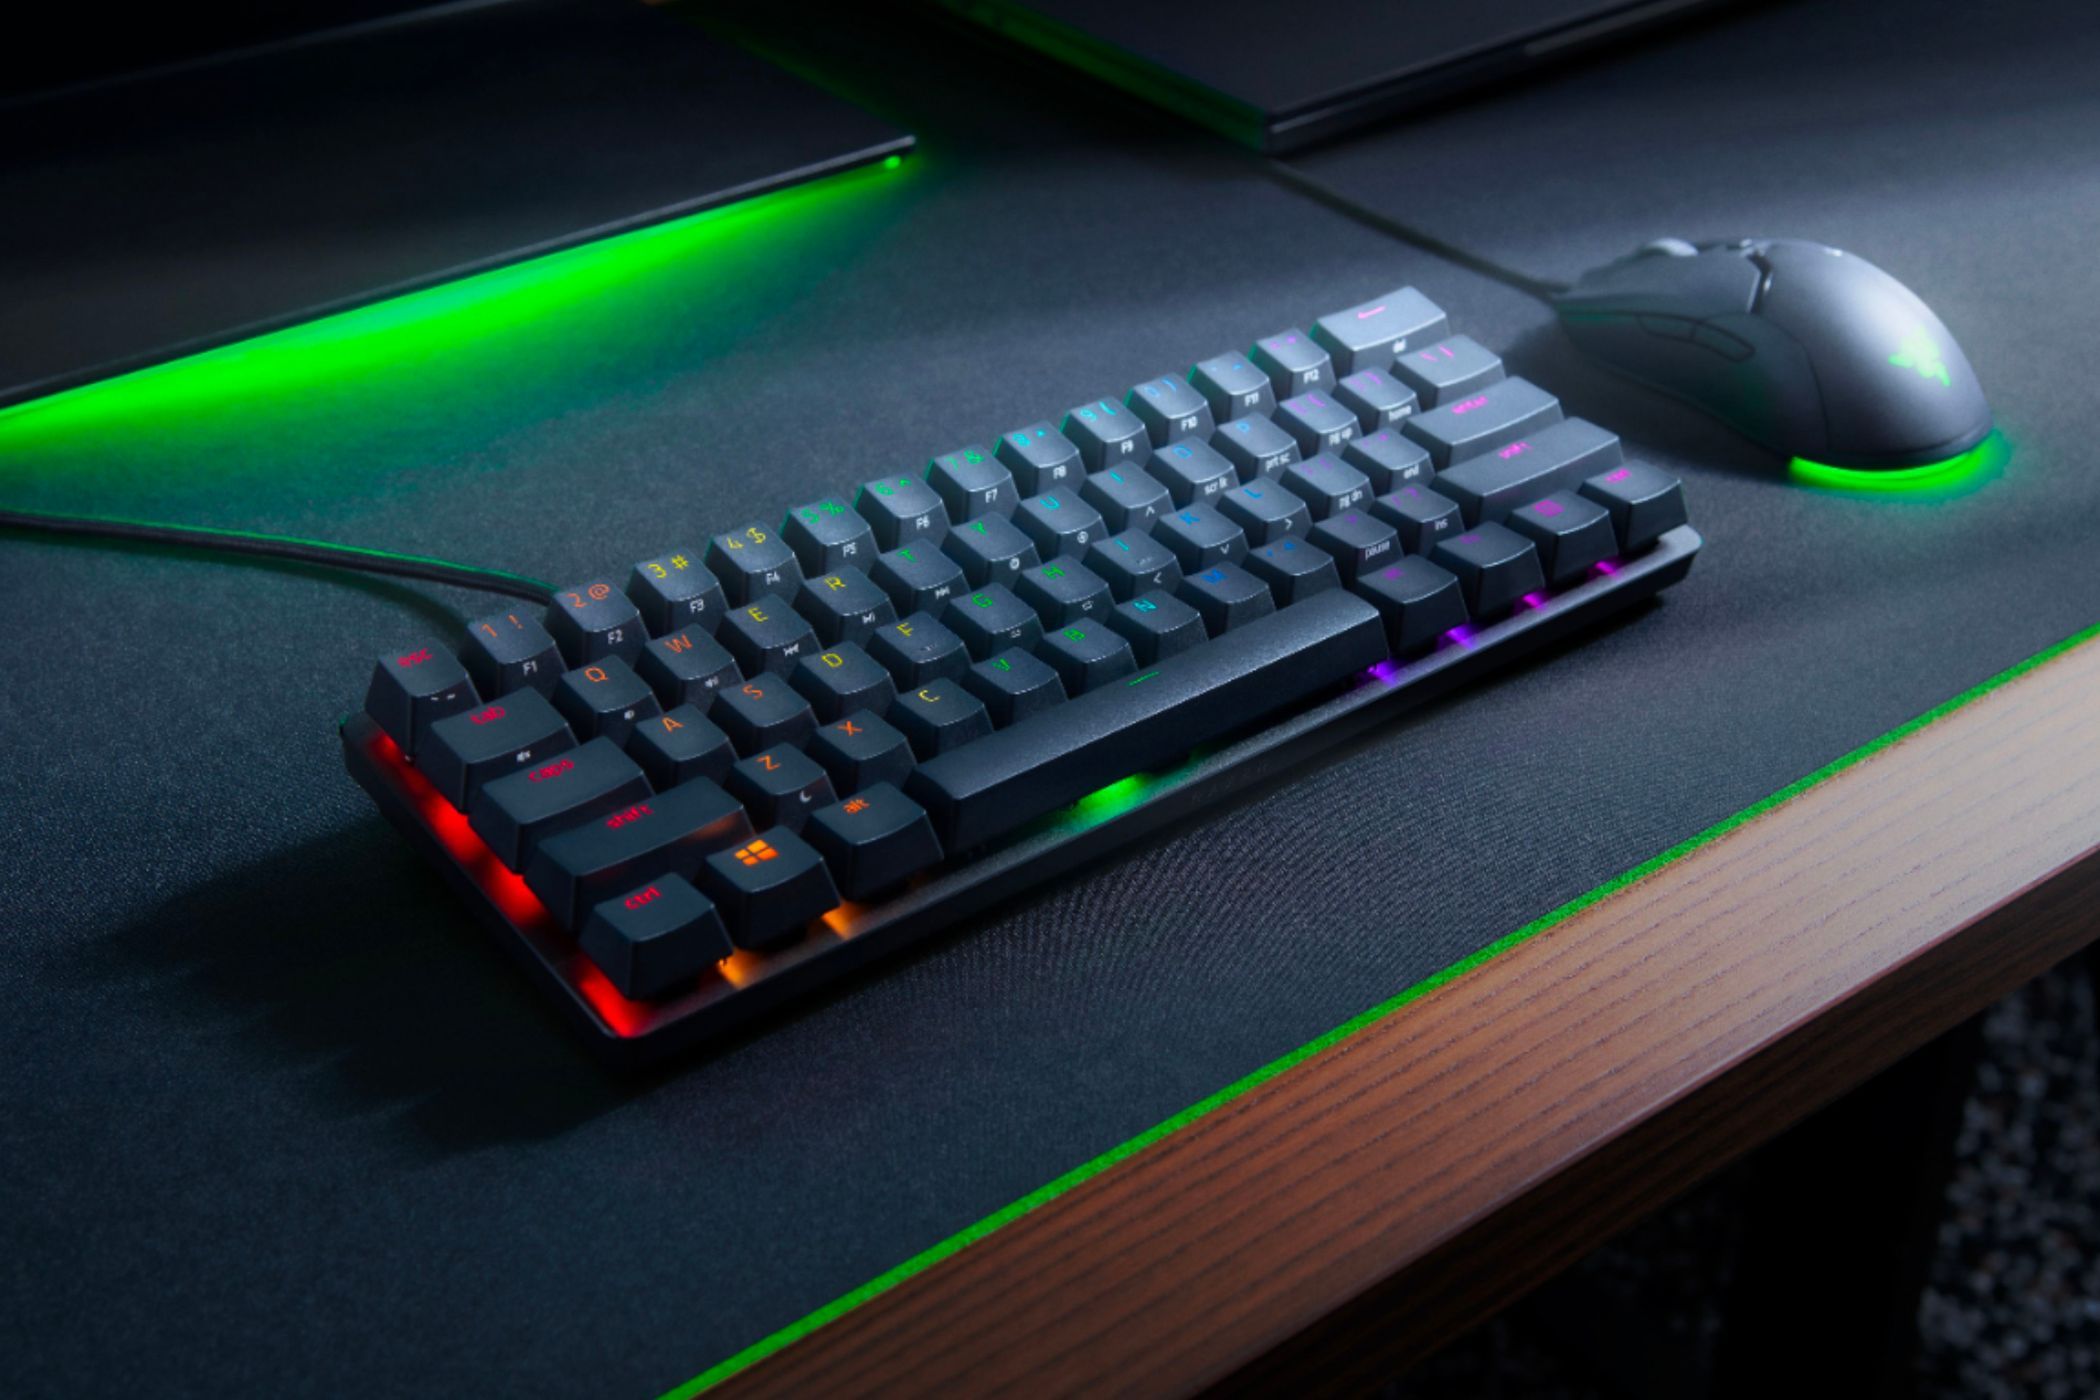 An image showing the Razer Huntsman mini keyboard next to a Razer mouse over a black-colored mousemat with green accents.